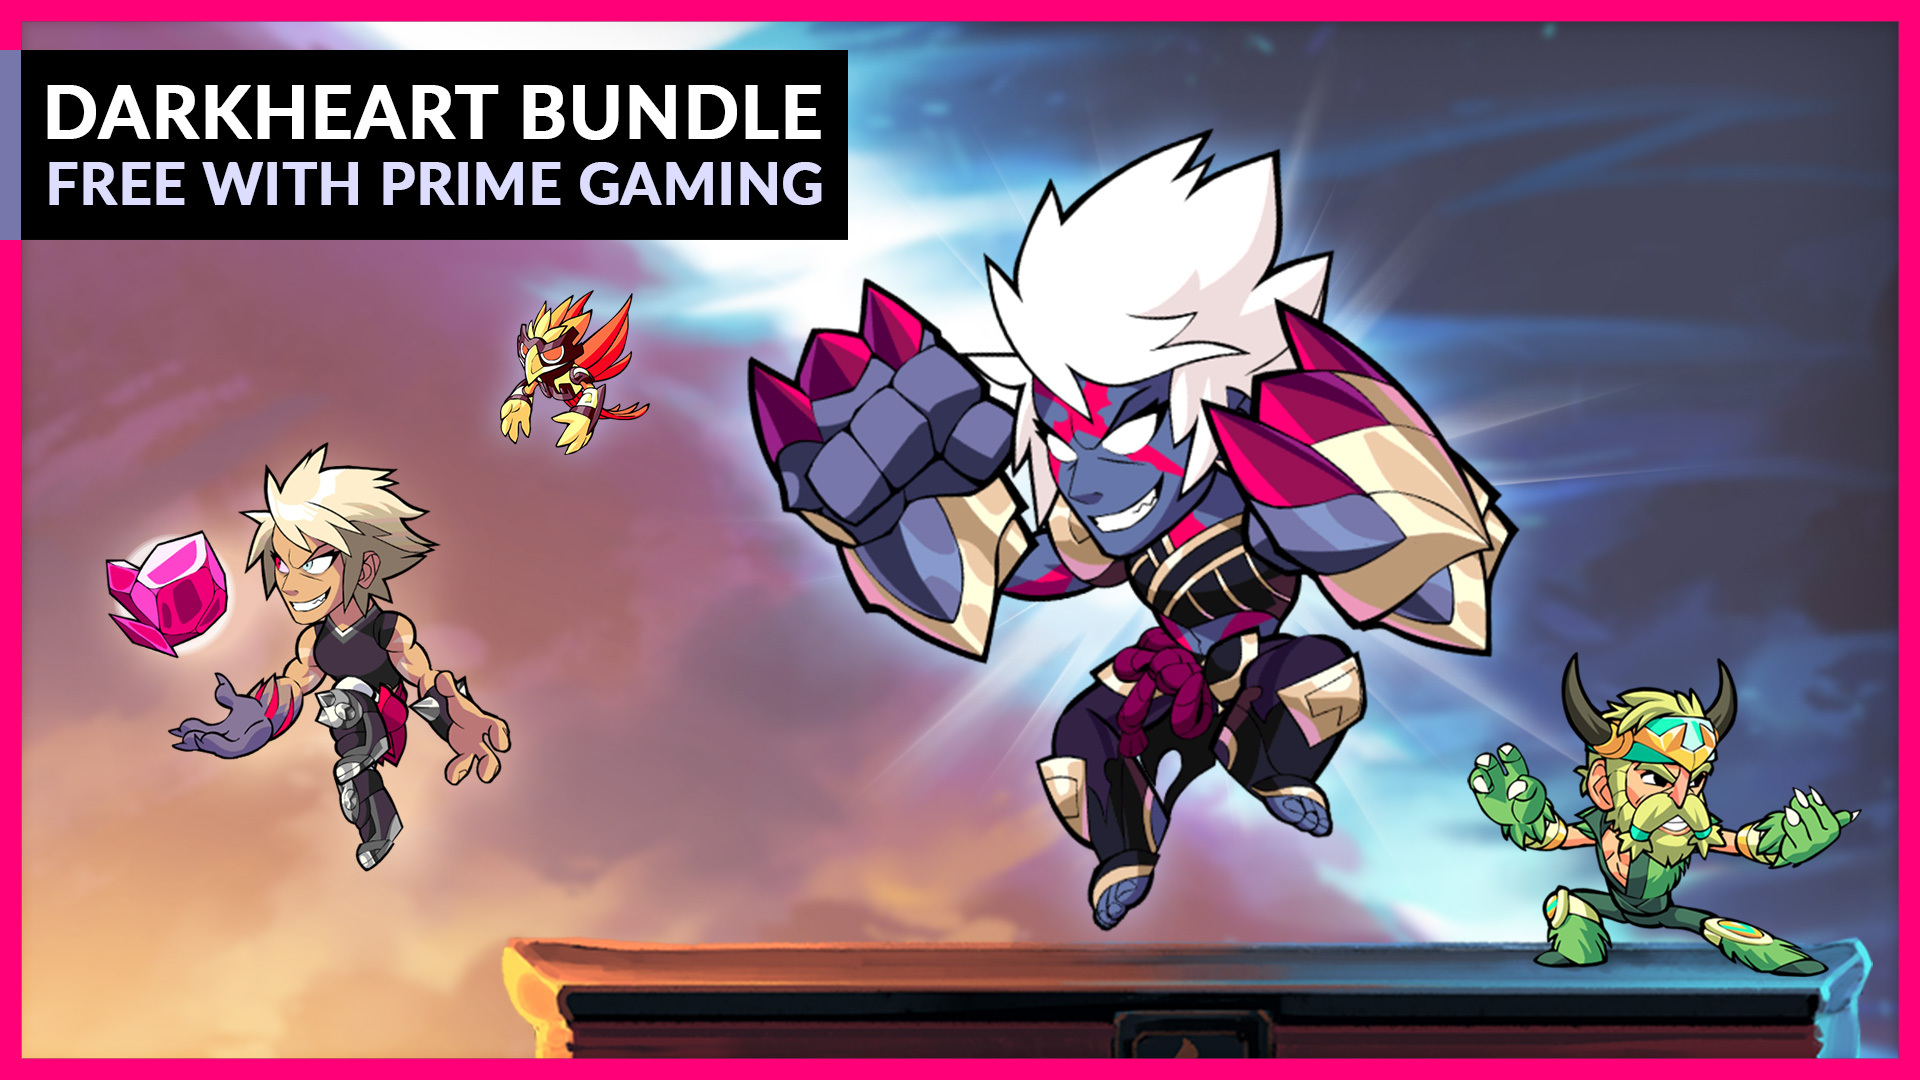 Get the Darkheart Bundle with Prime Gaming